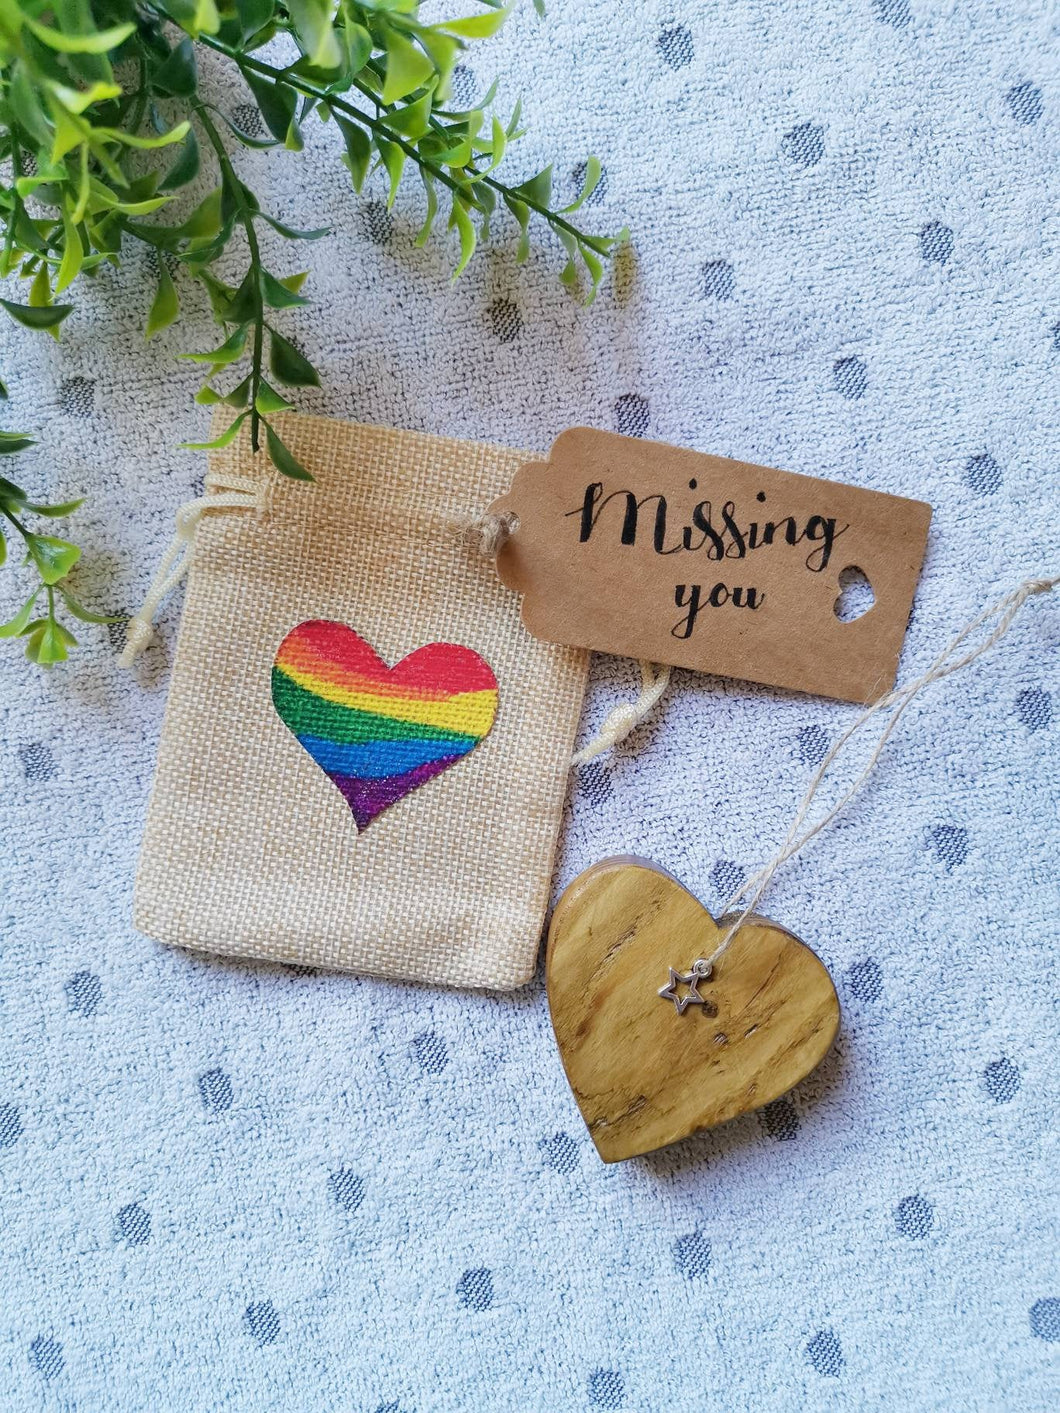 Lockdown Gifts, Letterbox gift, Solid Wood keepsake Heart in Rainbow Gift Bag, positivity, mental health, Missing you, Love you, Stay strong